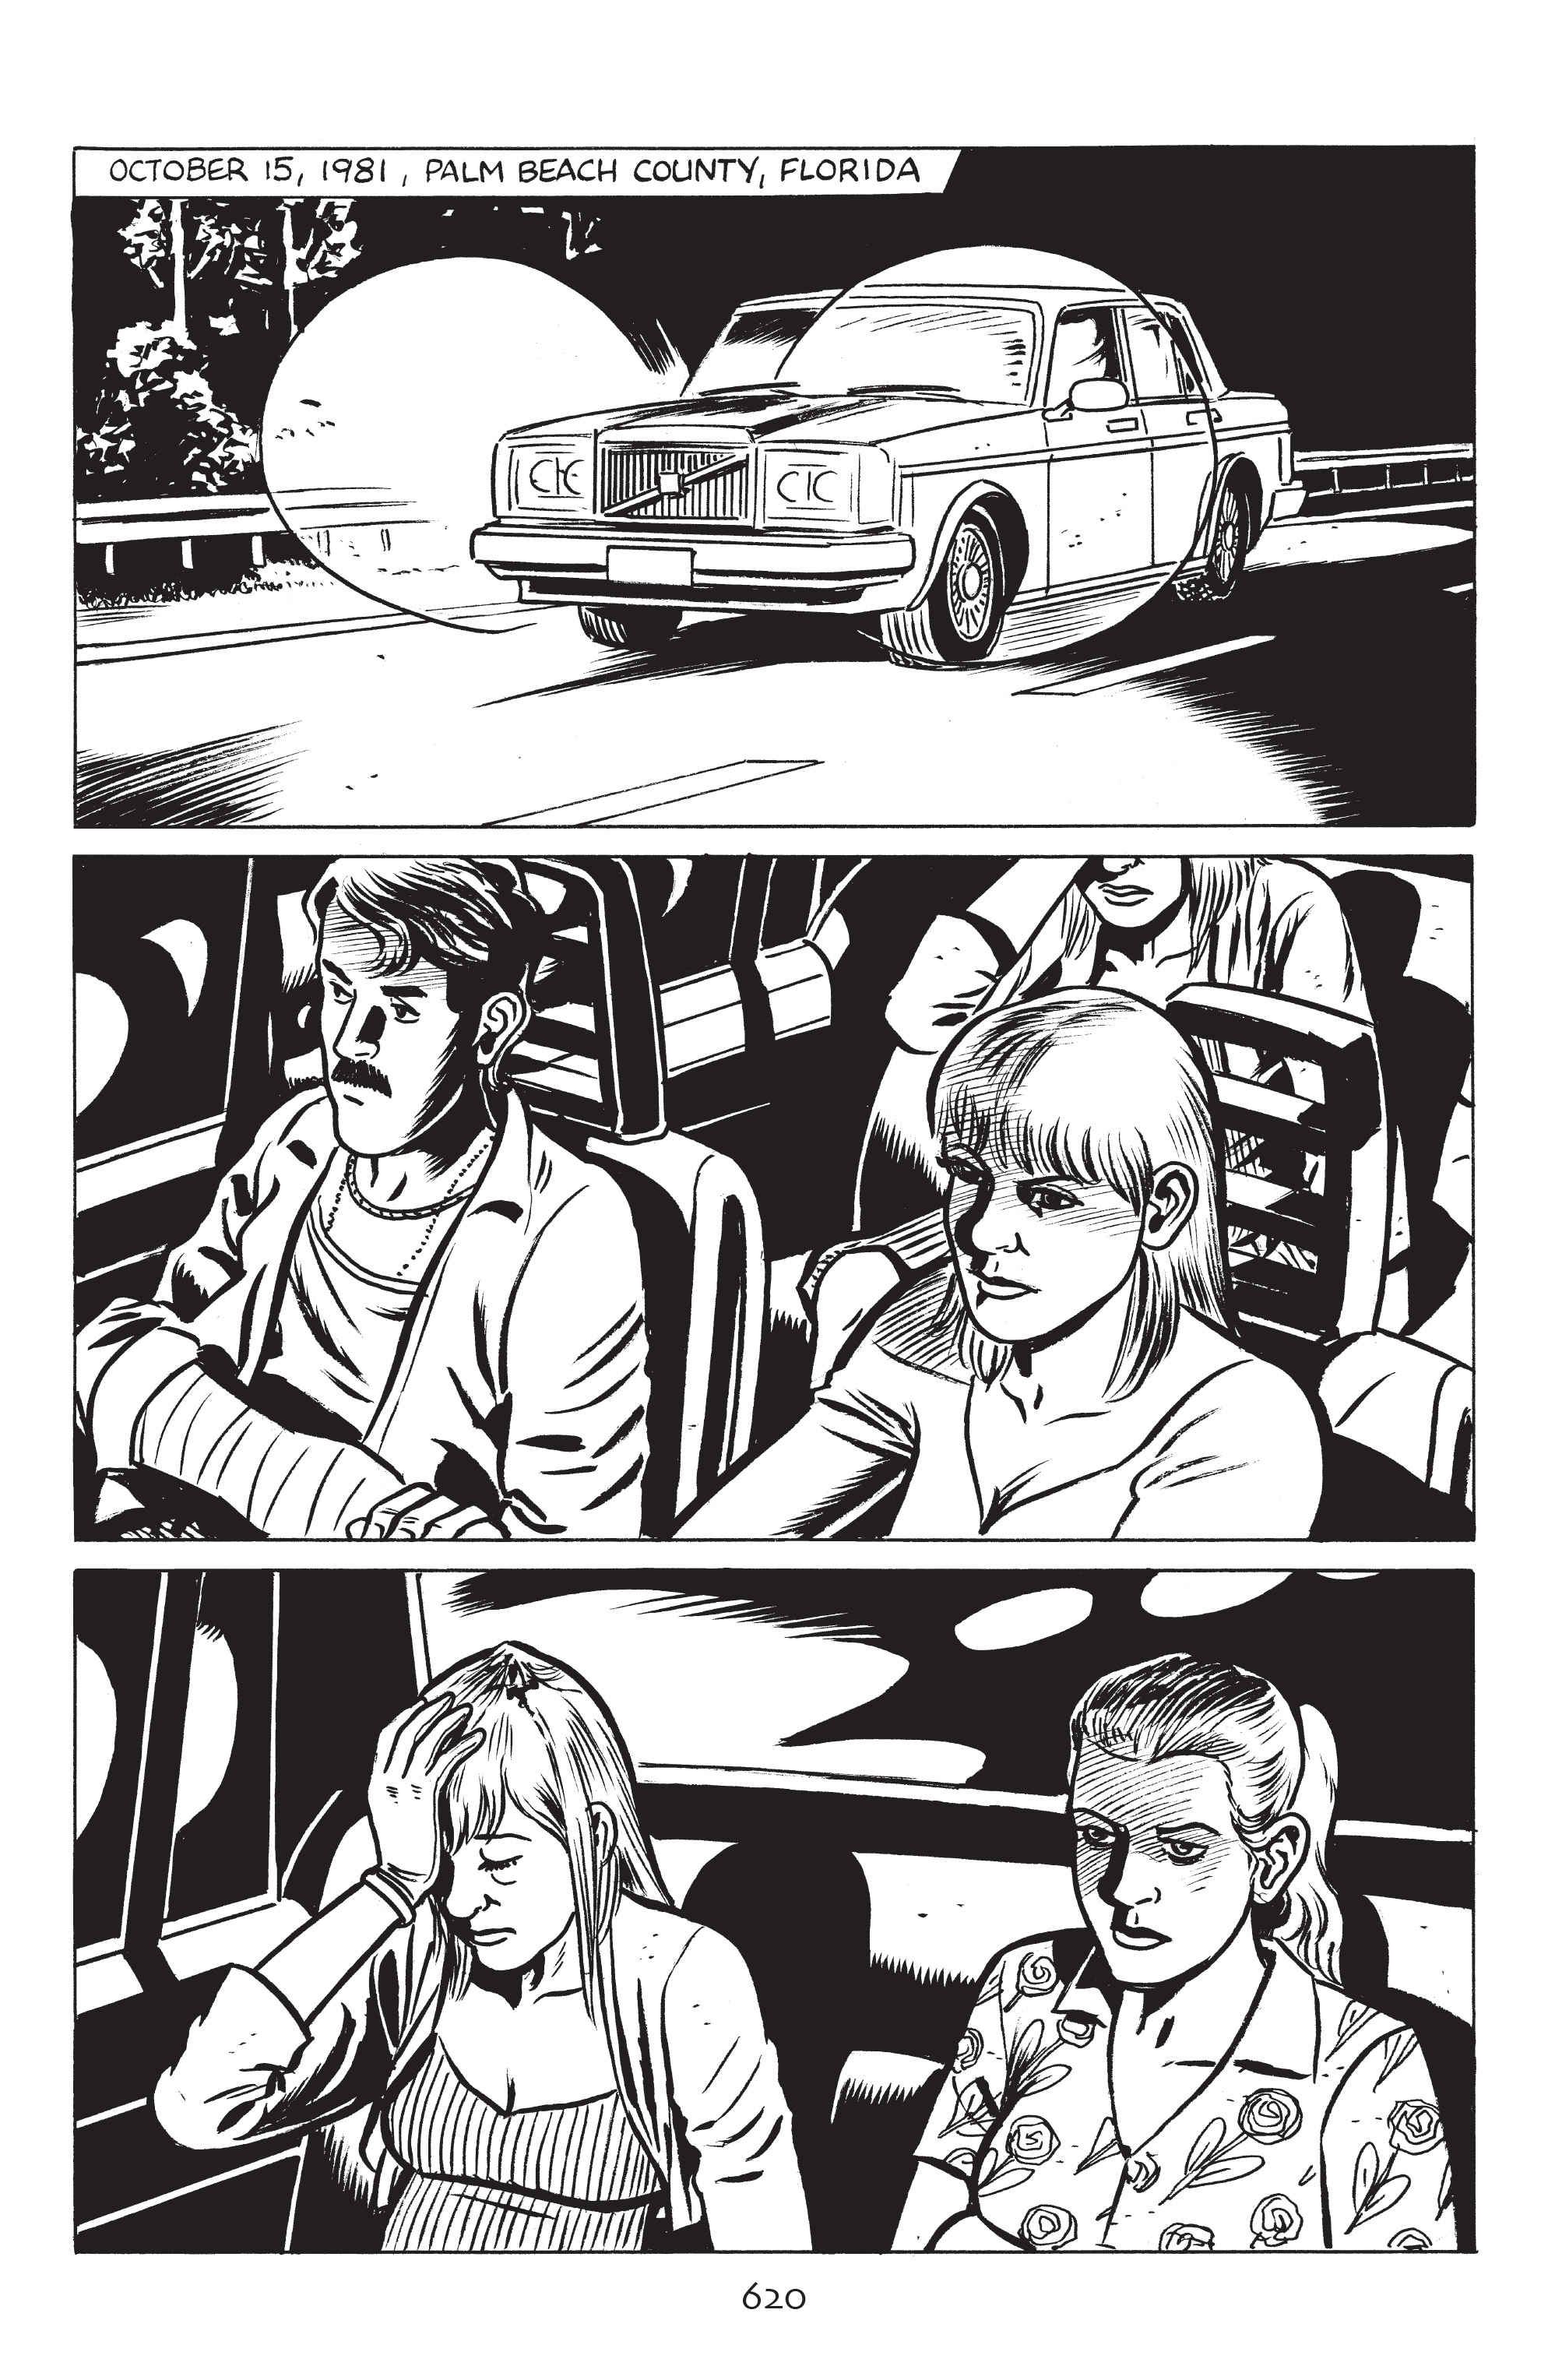 Stray Bullets: Sunshine & Roses (2015-): Chapter 23 - Page 3